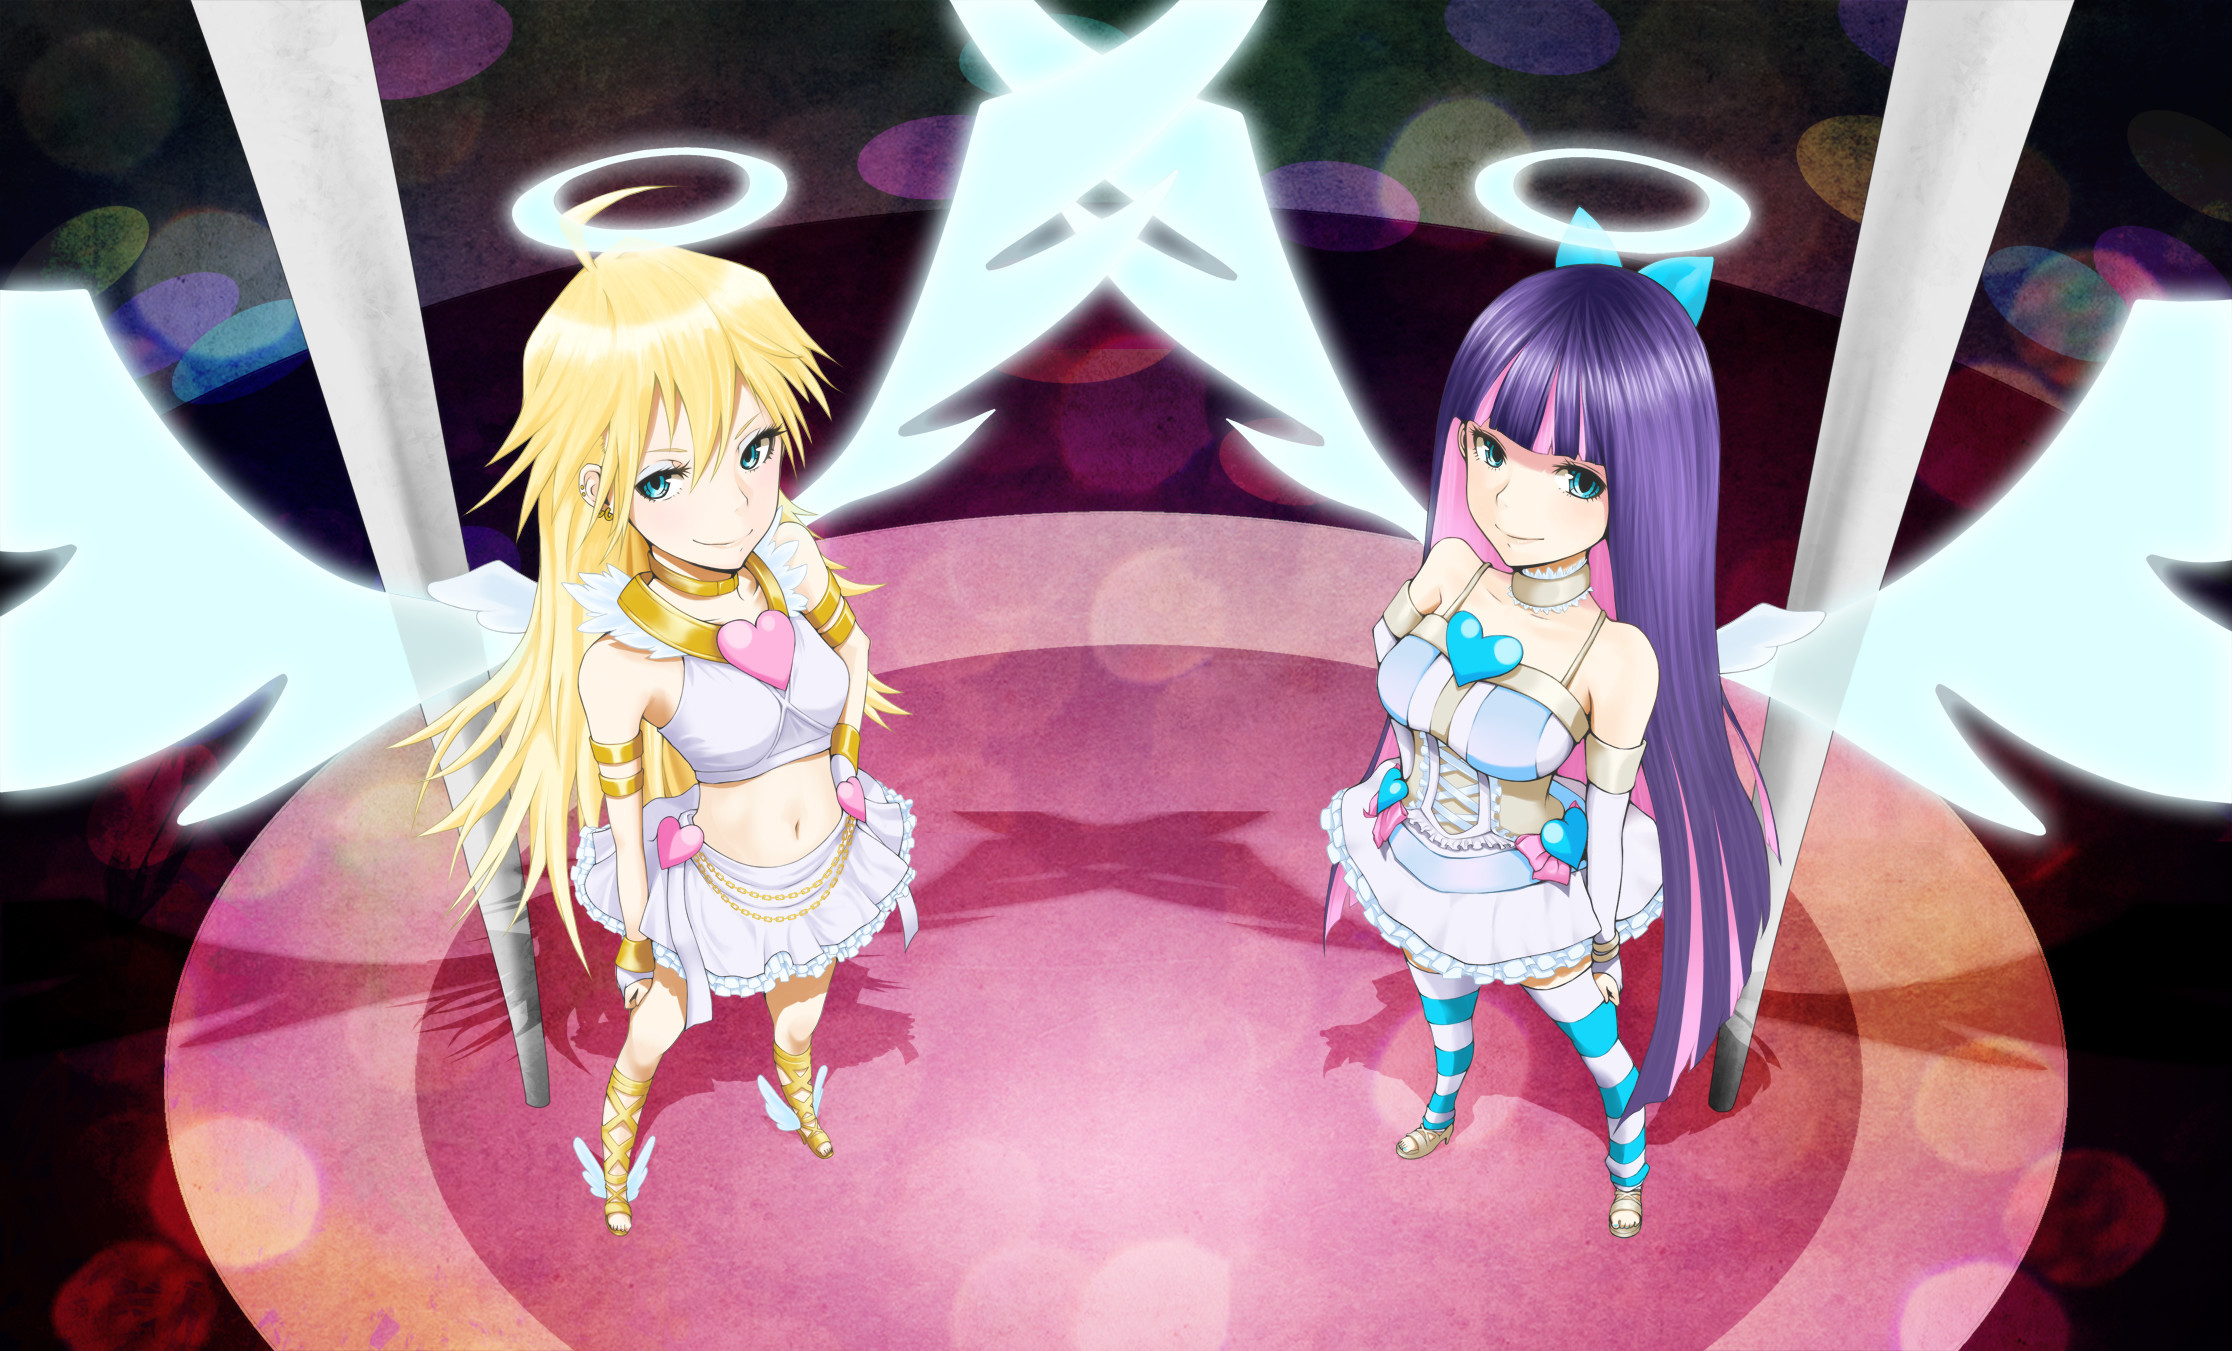 2232x1351 large-panty-and-stocking-with-garterbelt-wallpaper-2232Ã1351-WTG20041512